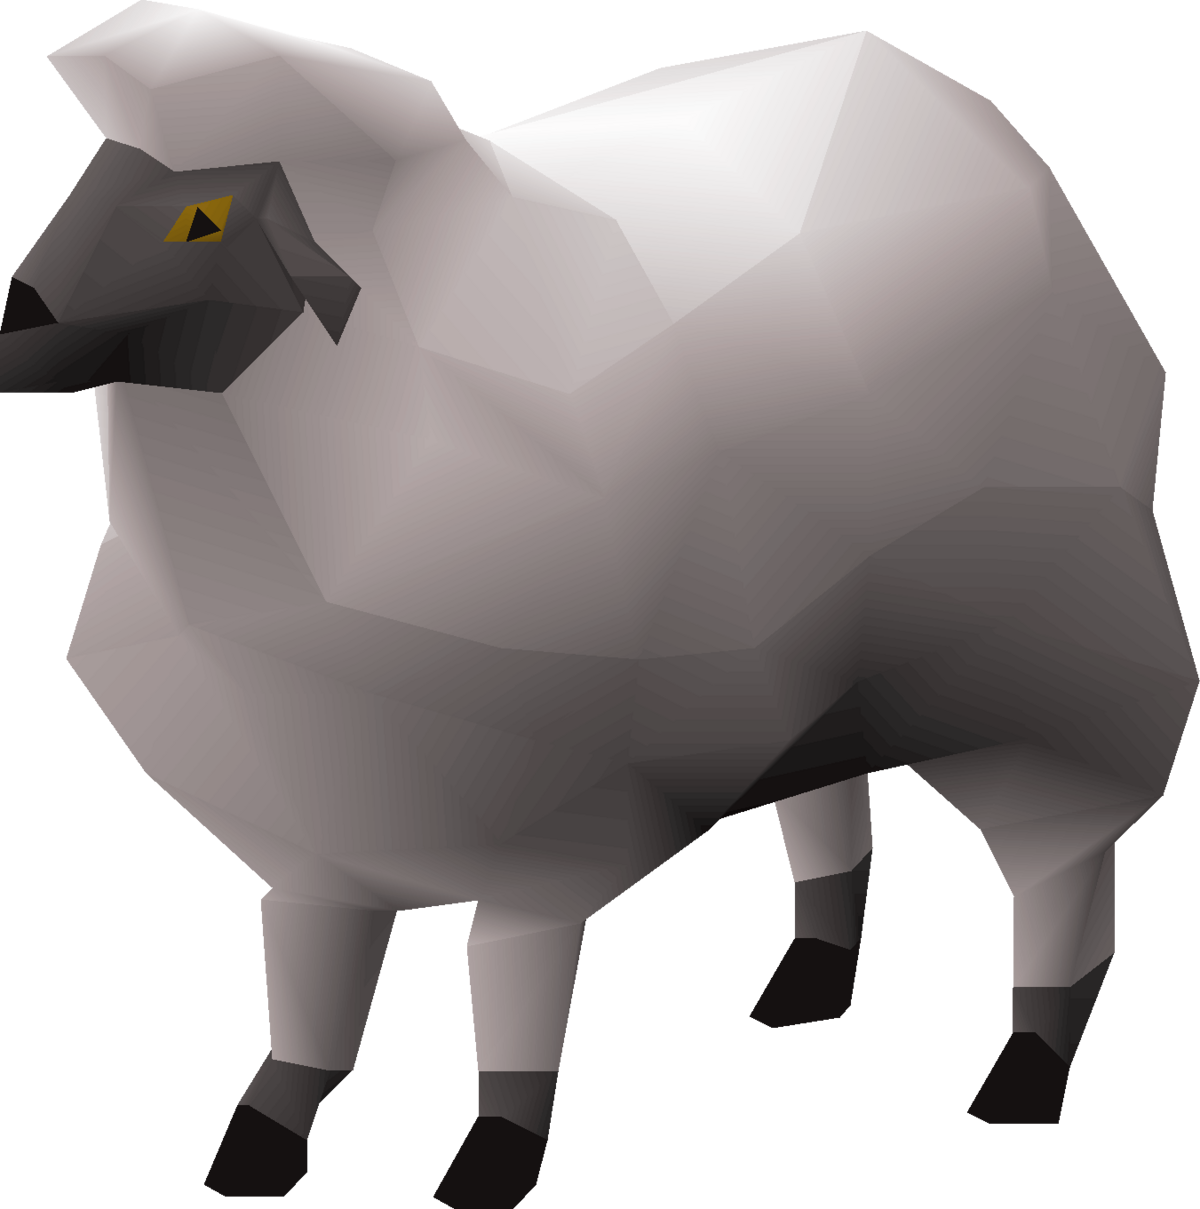 A Low Poly Sheep With Black Legs